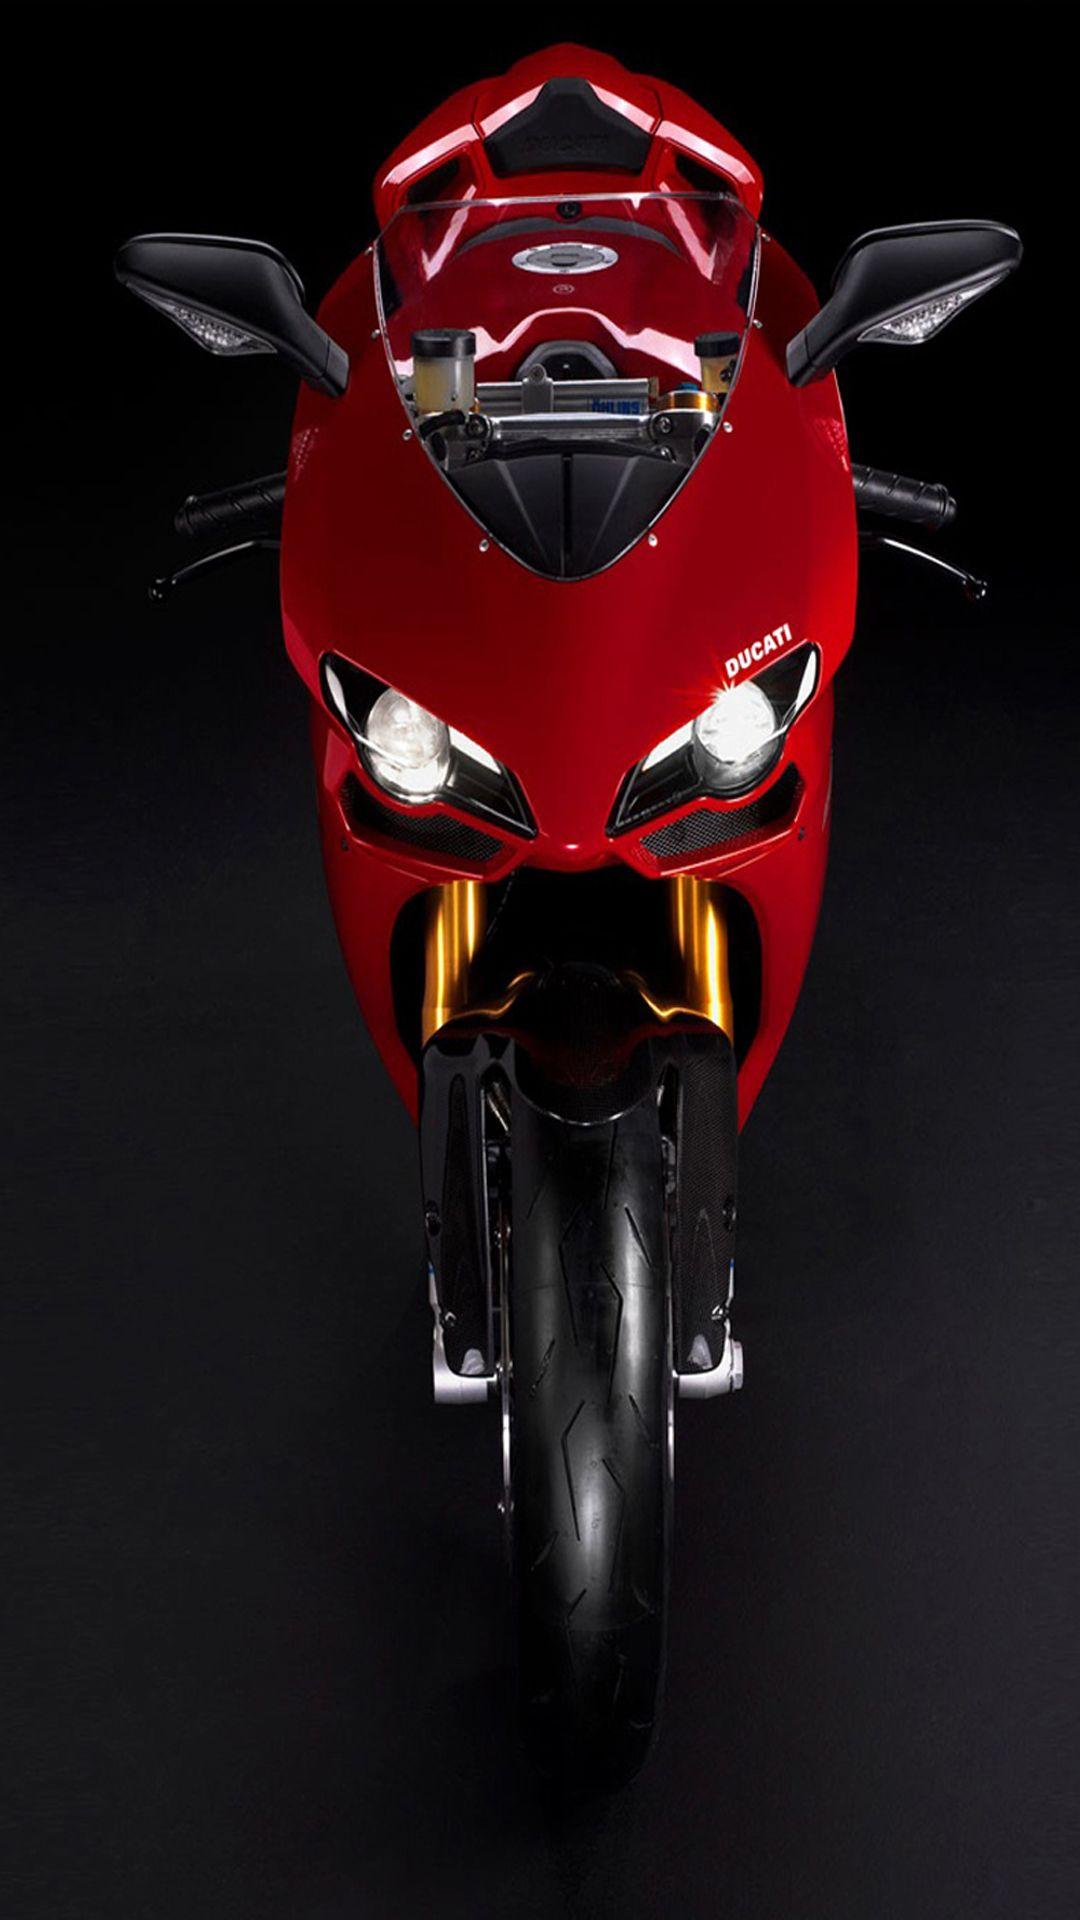 Bikes #Ducati 1198 Superbike Red Android Wallpaper